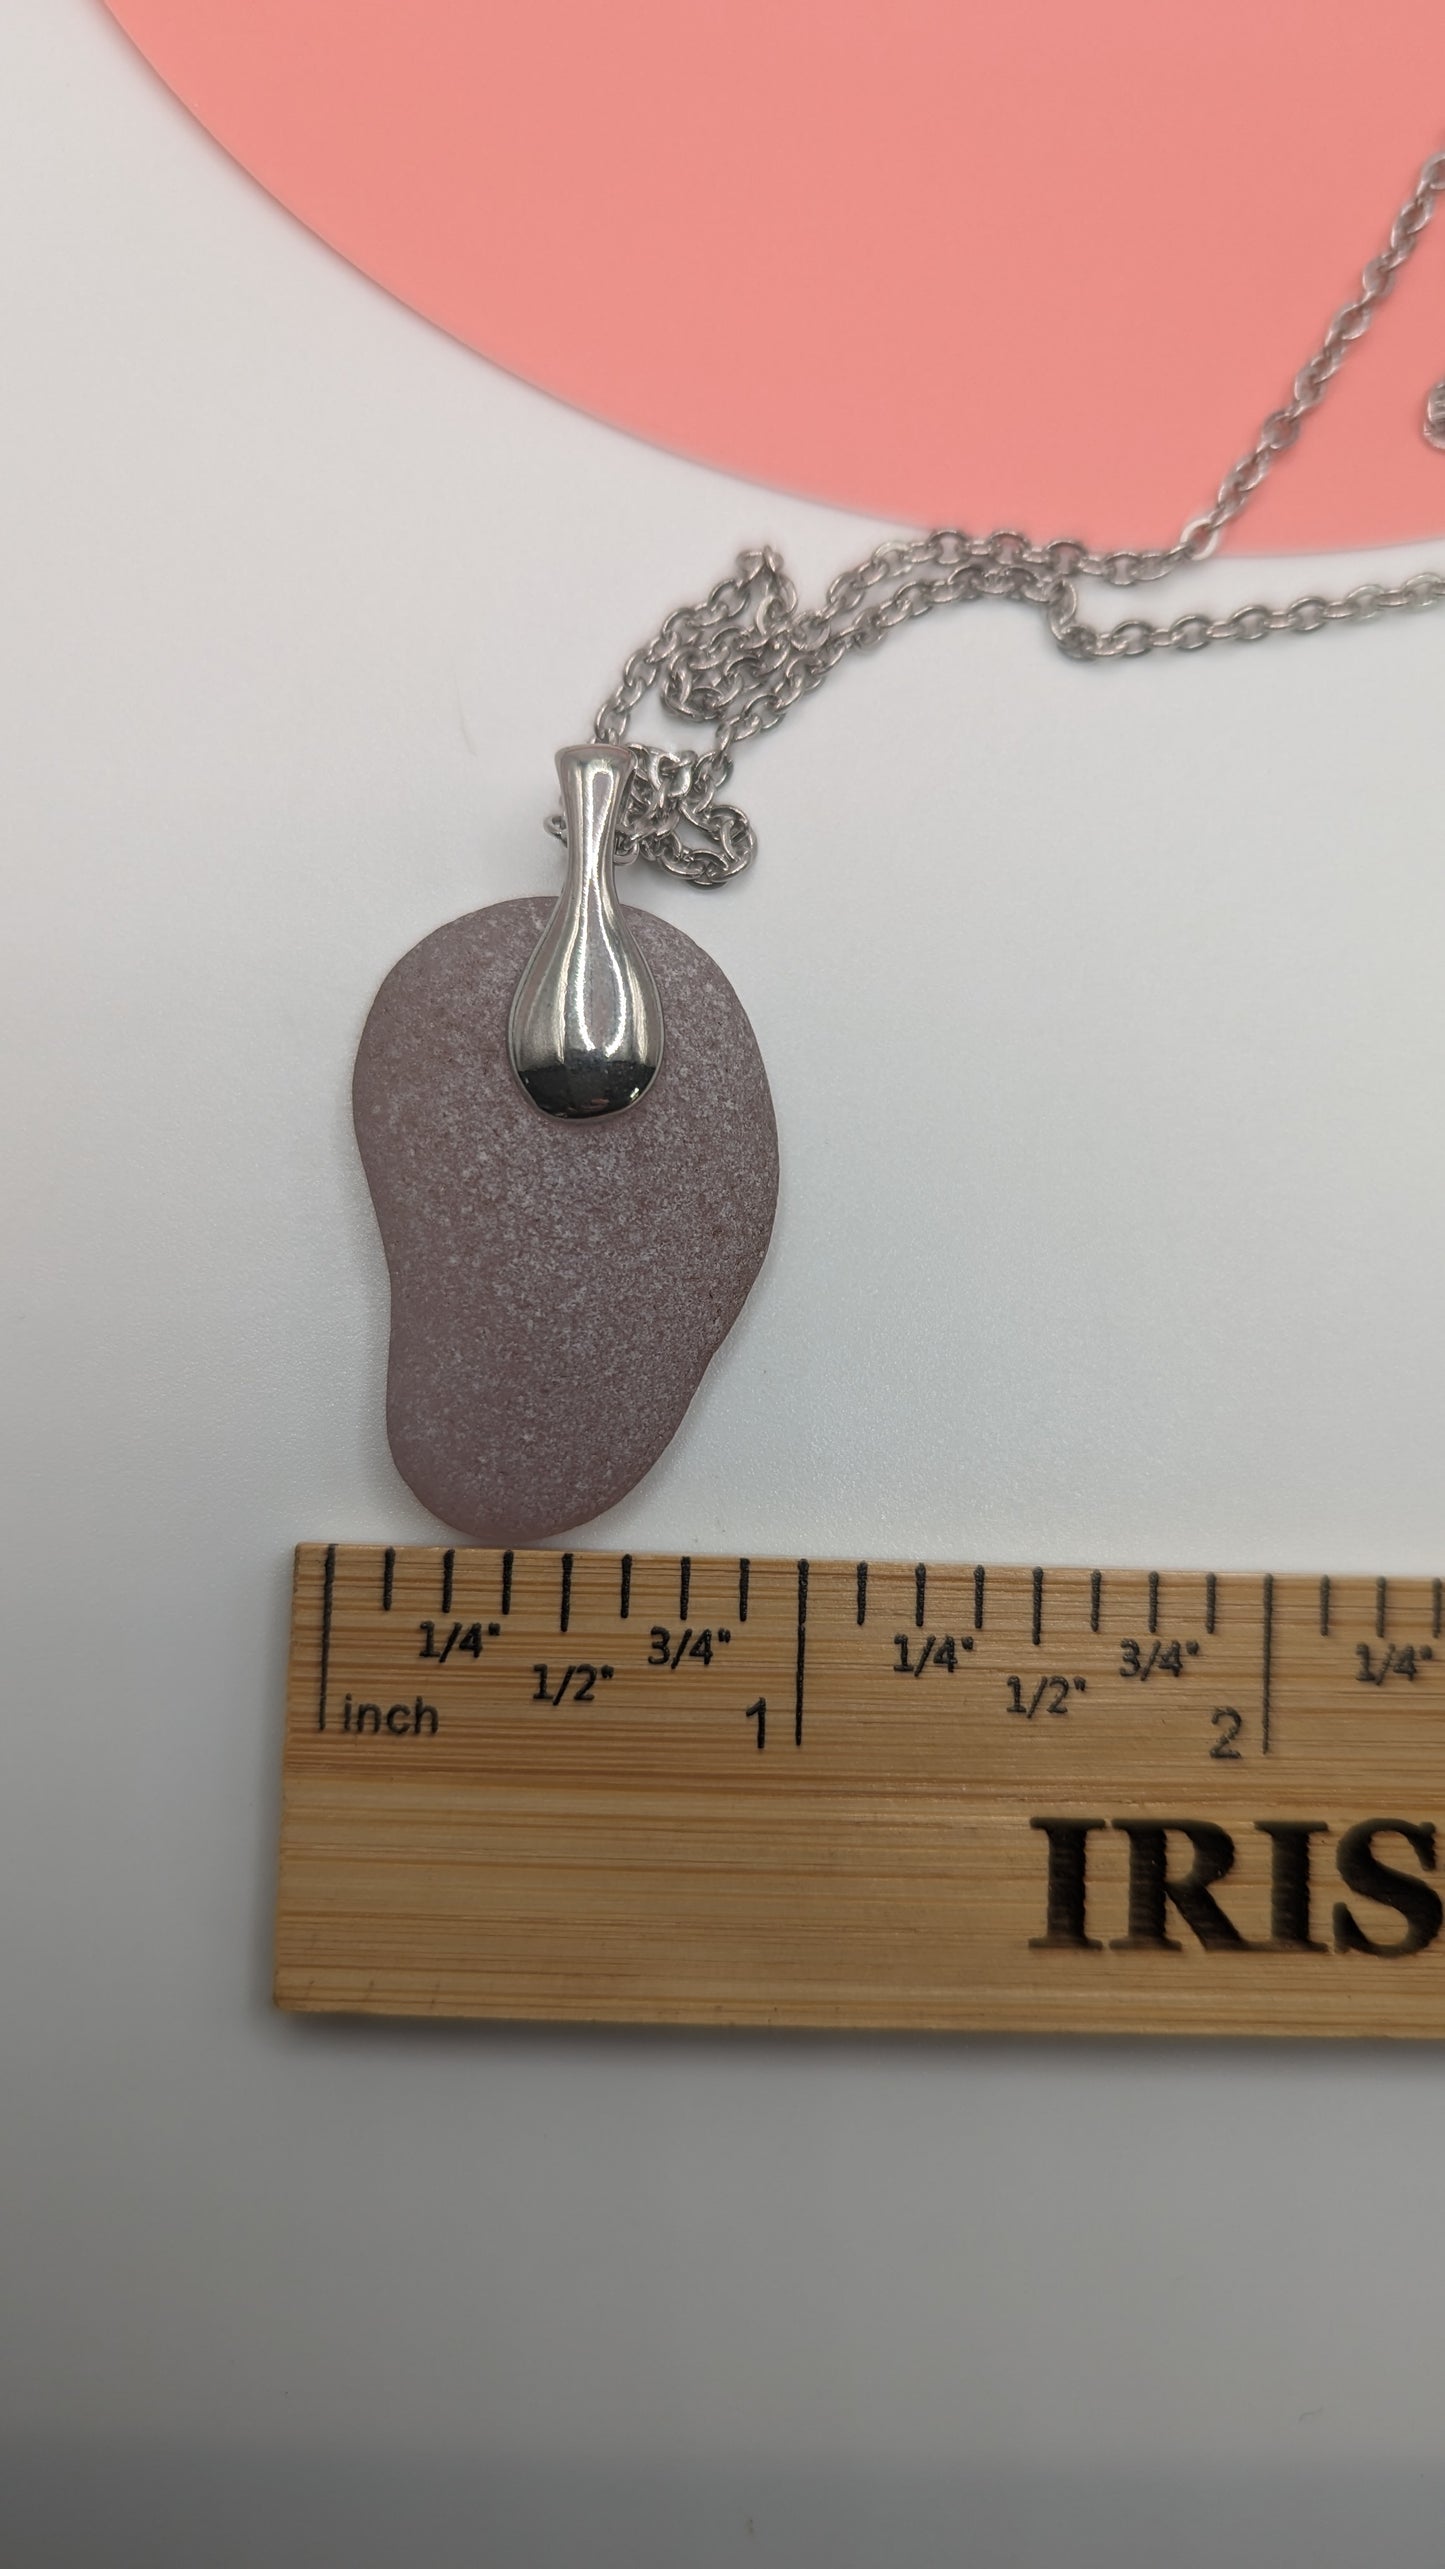 Lavender Seaglass necklace with stainless steel chain, seaglass jewelry, genuine beach tumbled sea glass